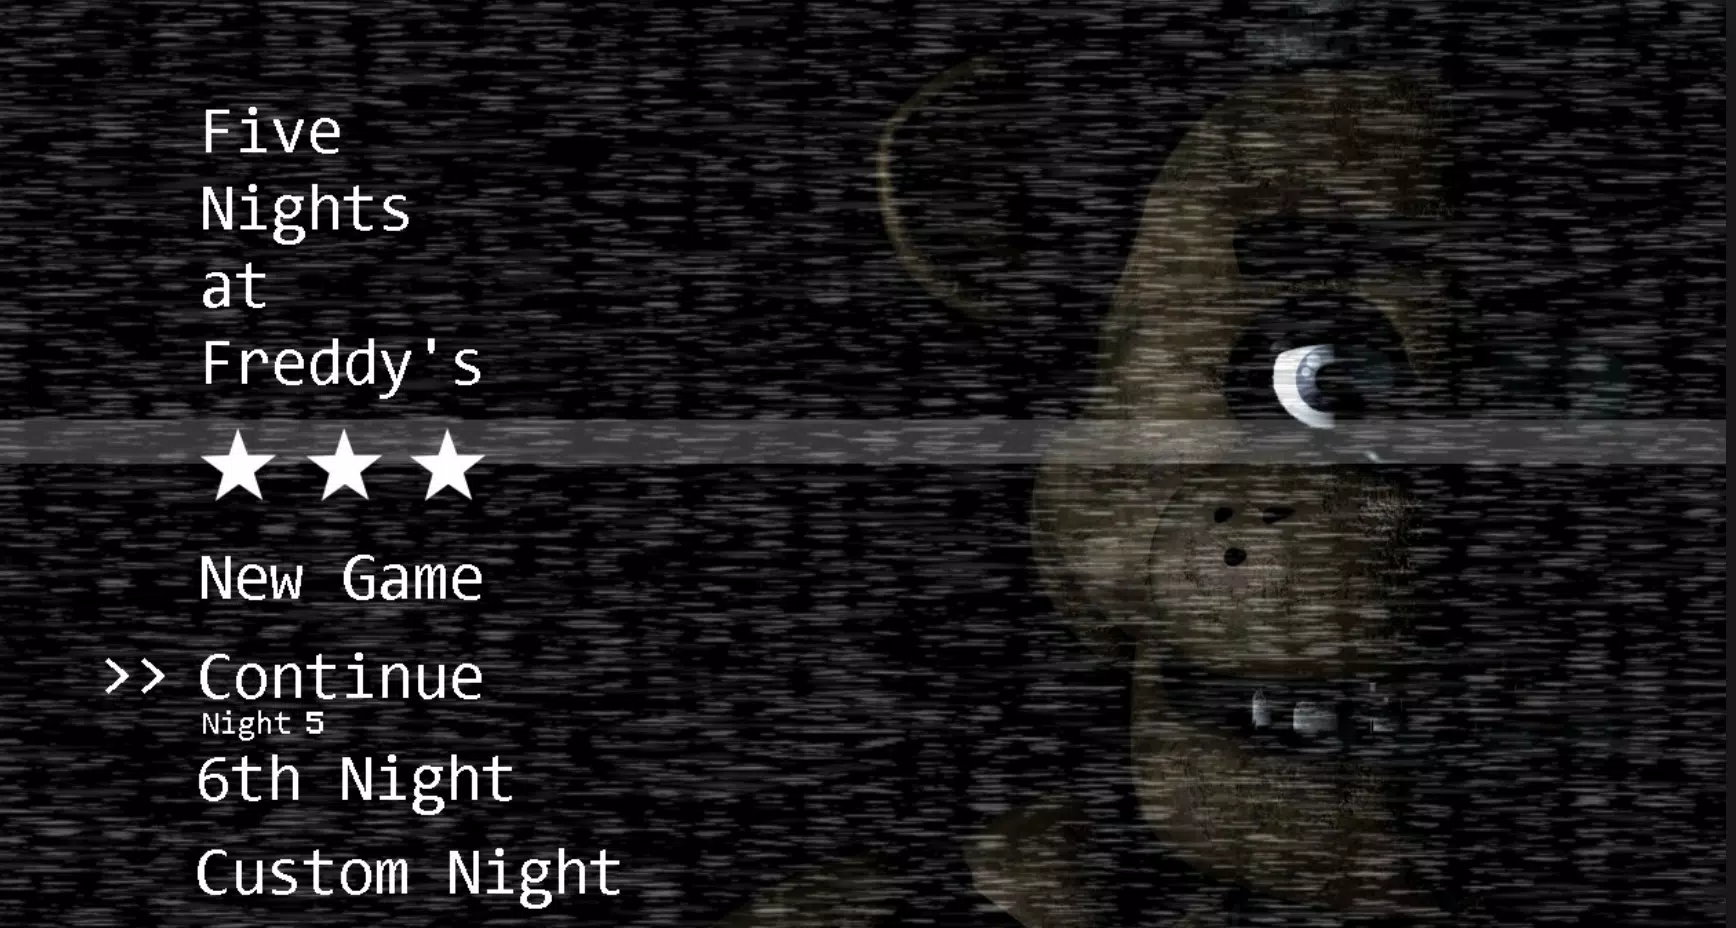 Five nights at Freddy's 2 Download APK for Android (Free)